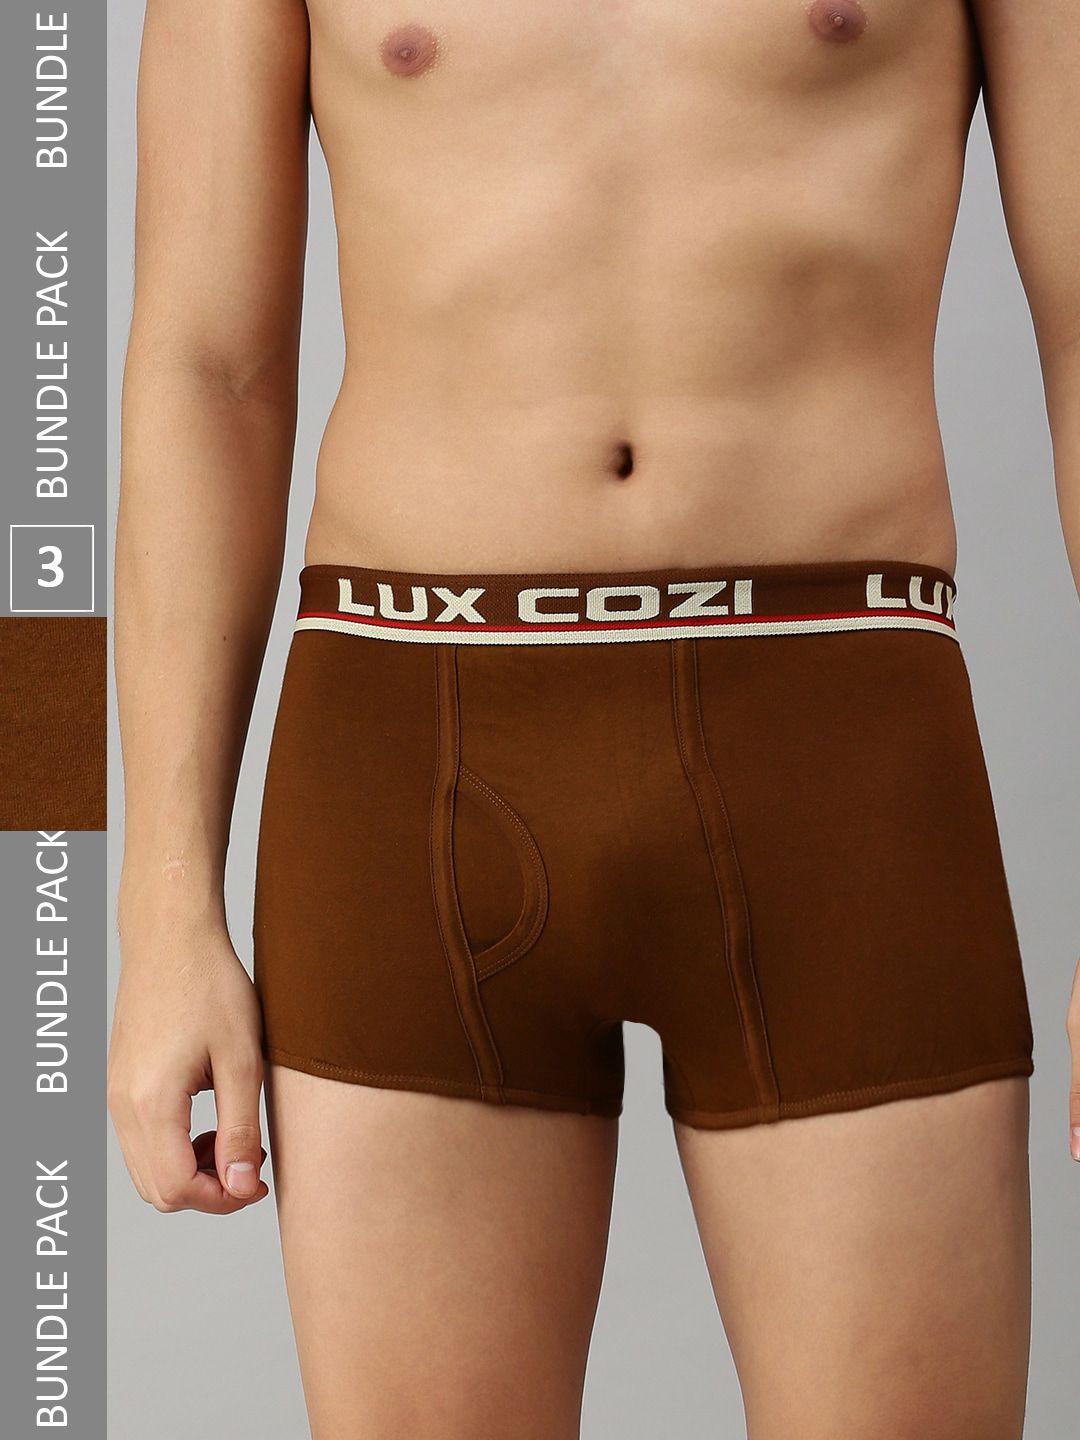 lux cozi men pack of 3 mid-rise pure cotton trunks